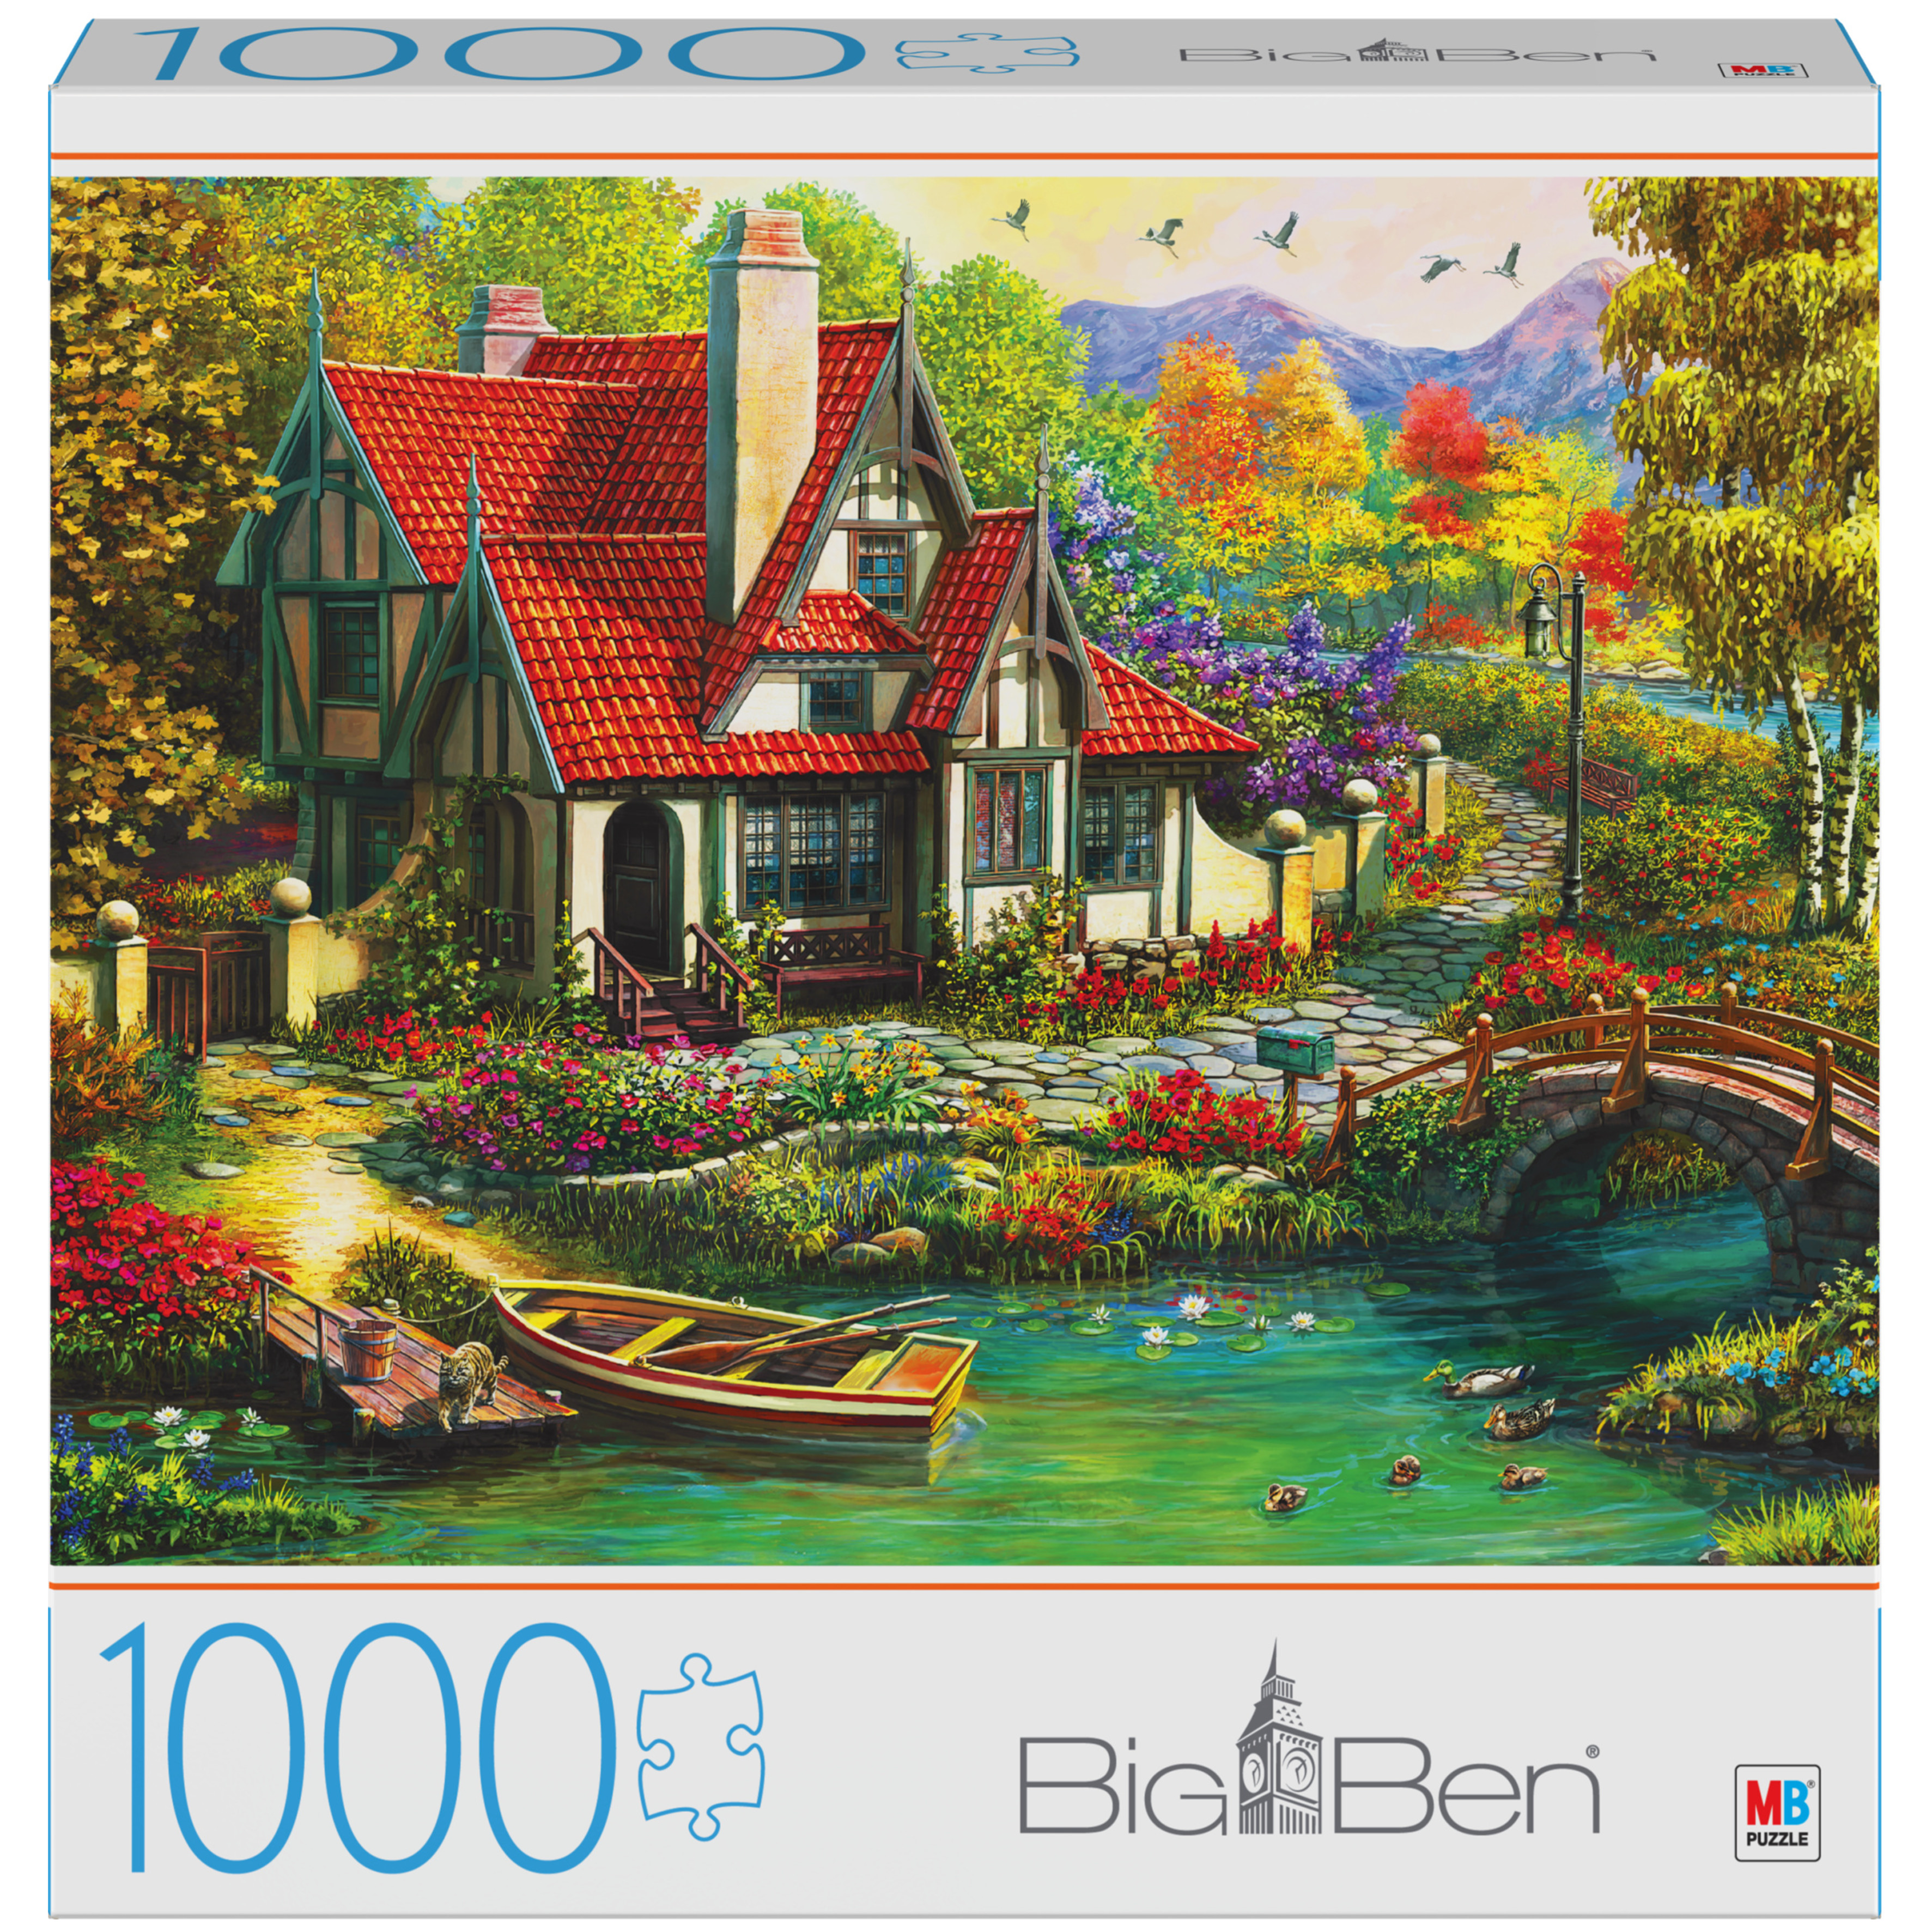 Big Ben Milton Bradley 1000-Piece Jigsaw Puzzle, for Adults and Kids Ages 8 and up (Styles Will Vary) - image 3 of 8